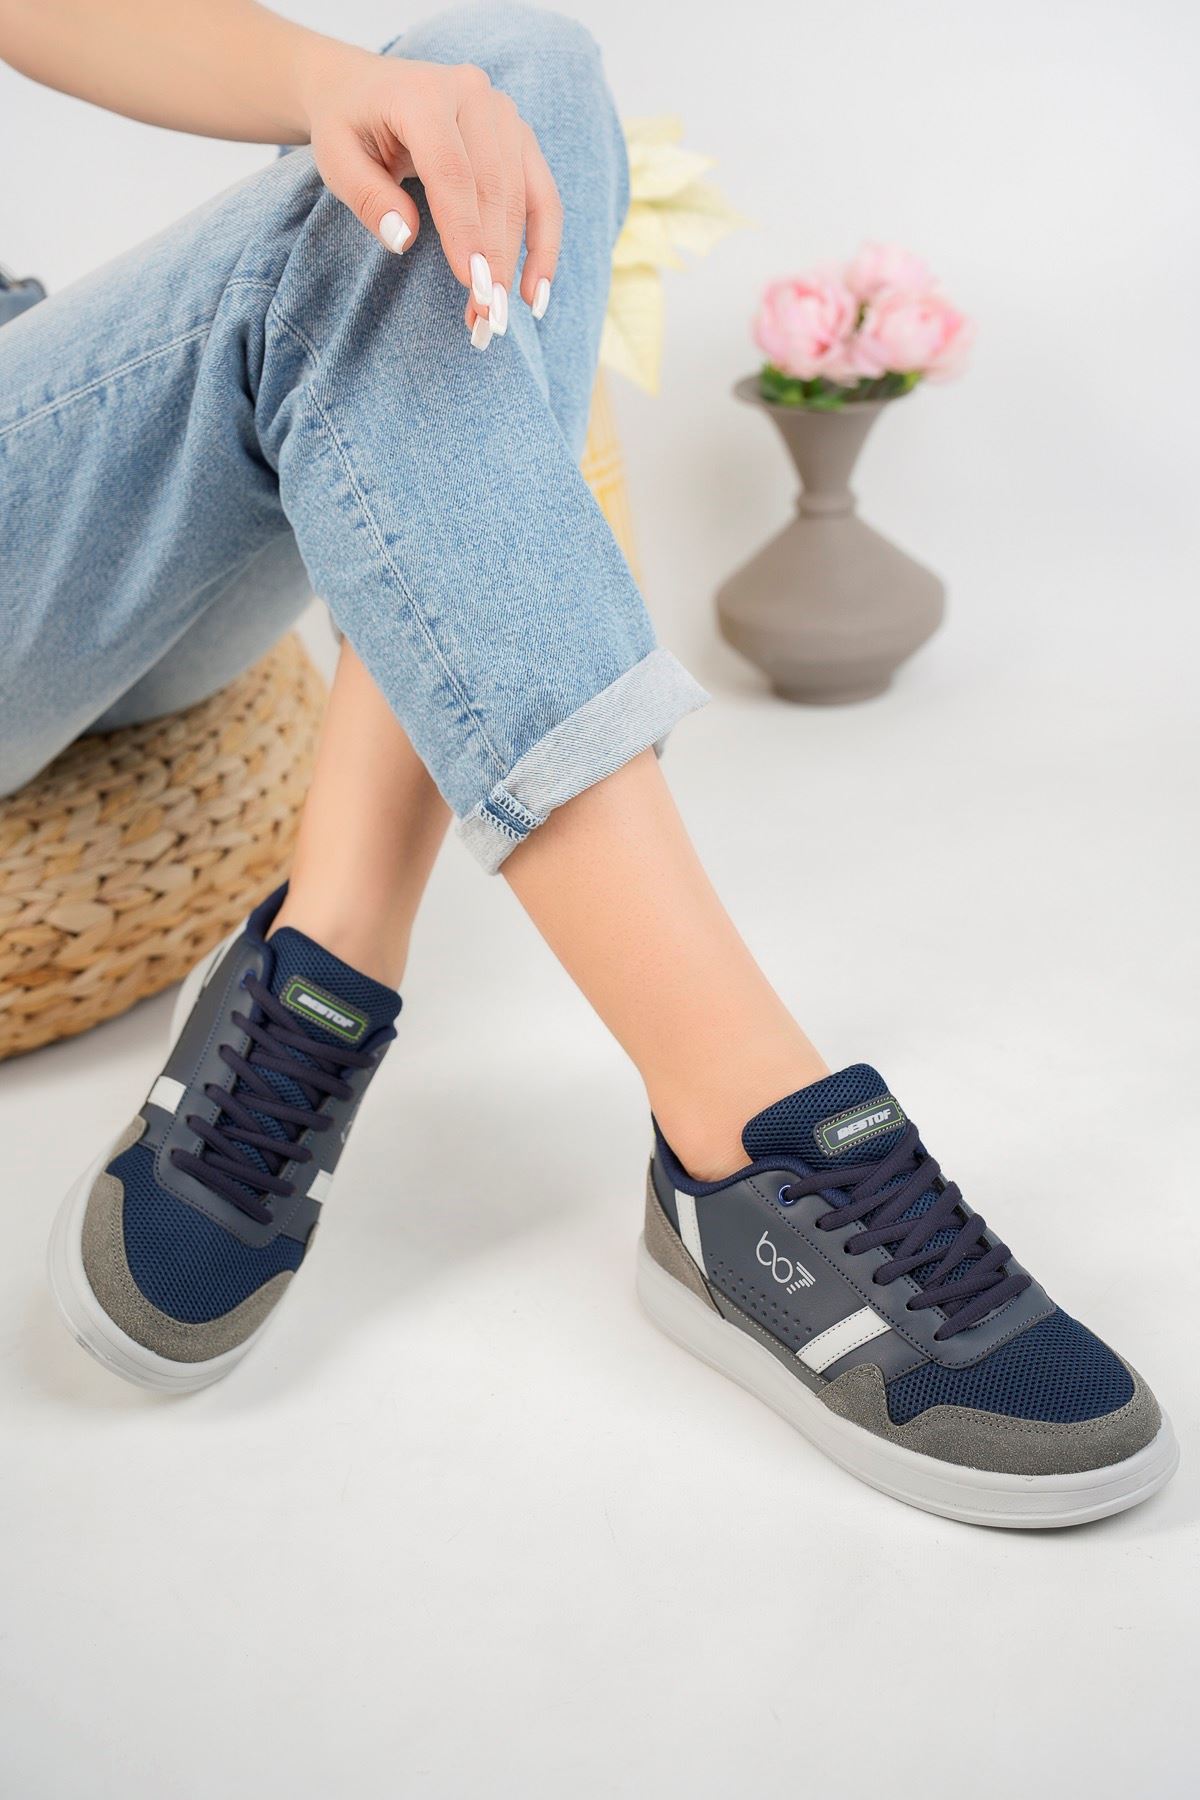 Lace-up Navy Blue Women's Sneakers